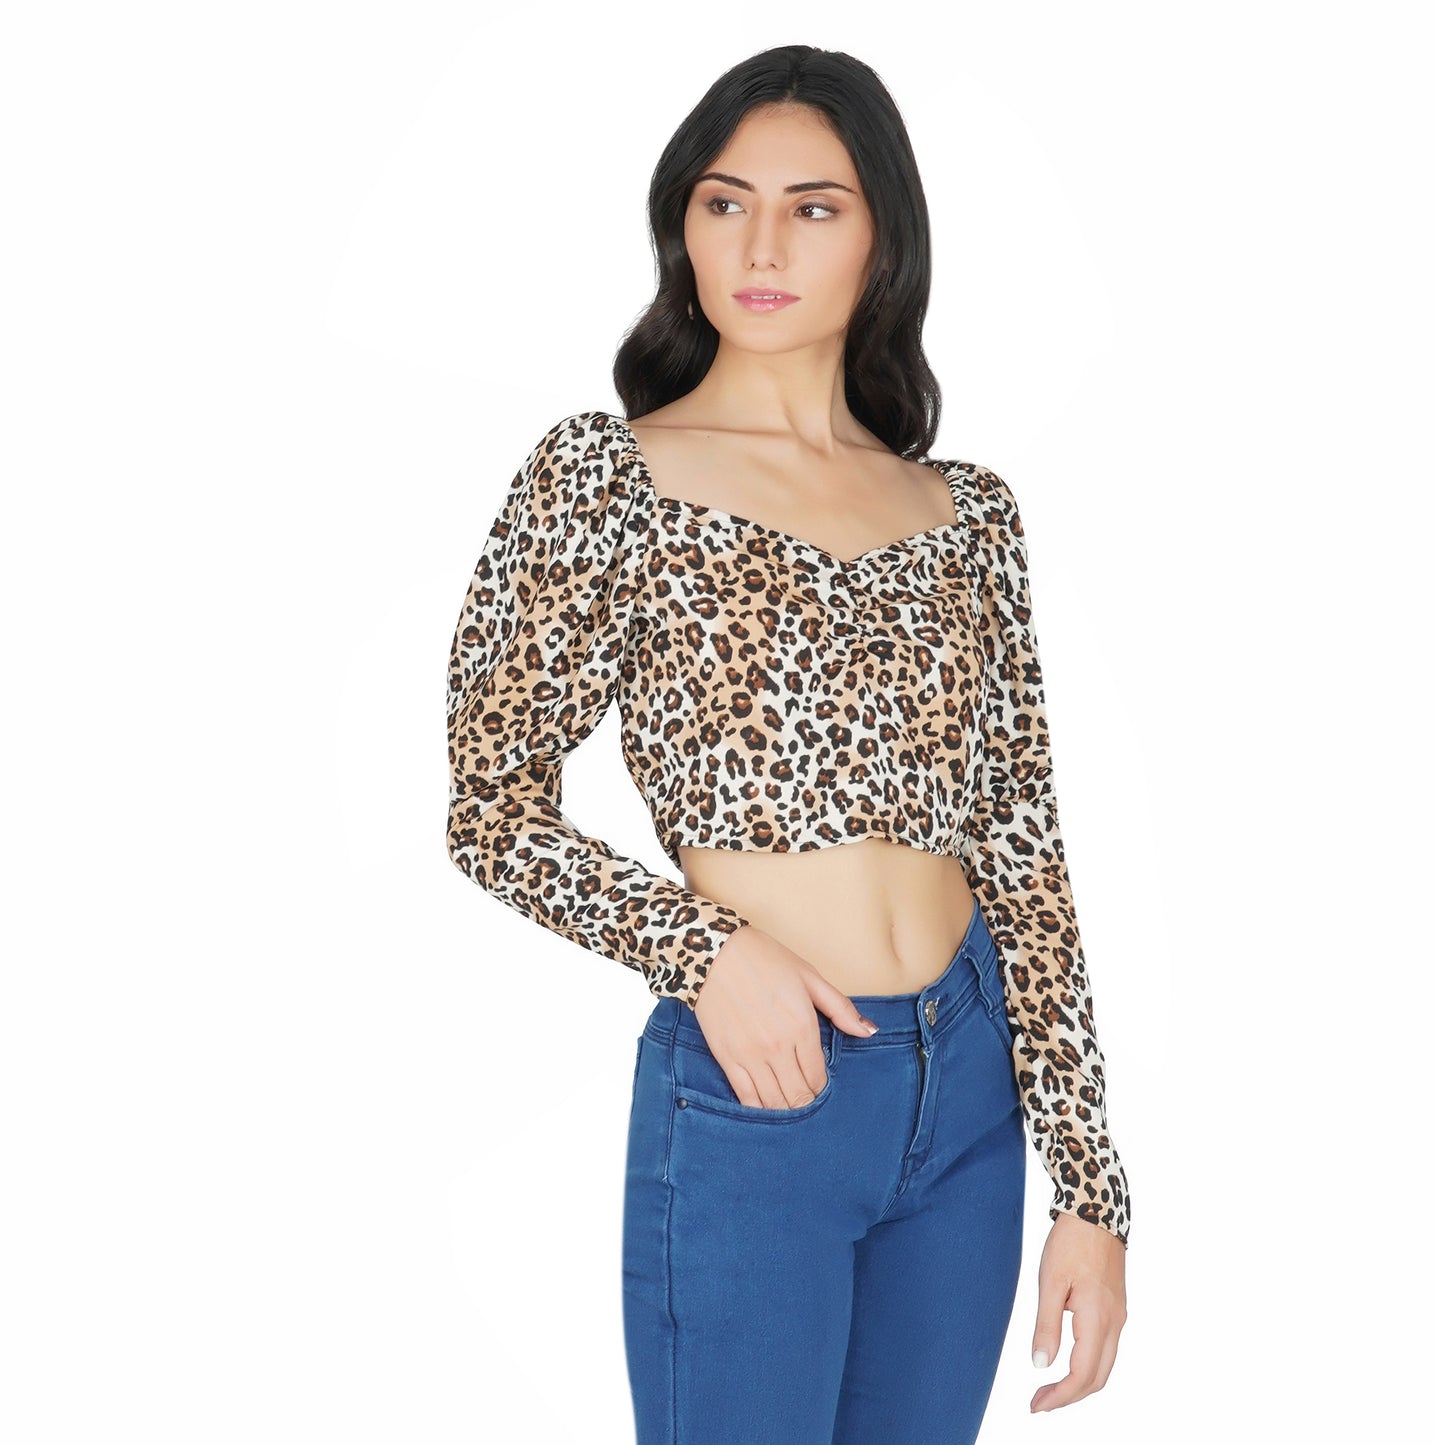 SLAY. Women's Animal Print Smocked Top with Puffed Sleeves-clothing-to-slay.myshopify.com-Leopard Print Shirt